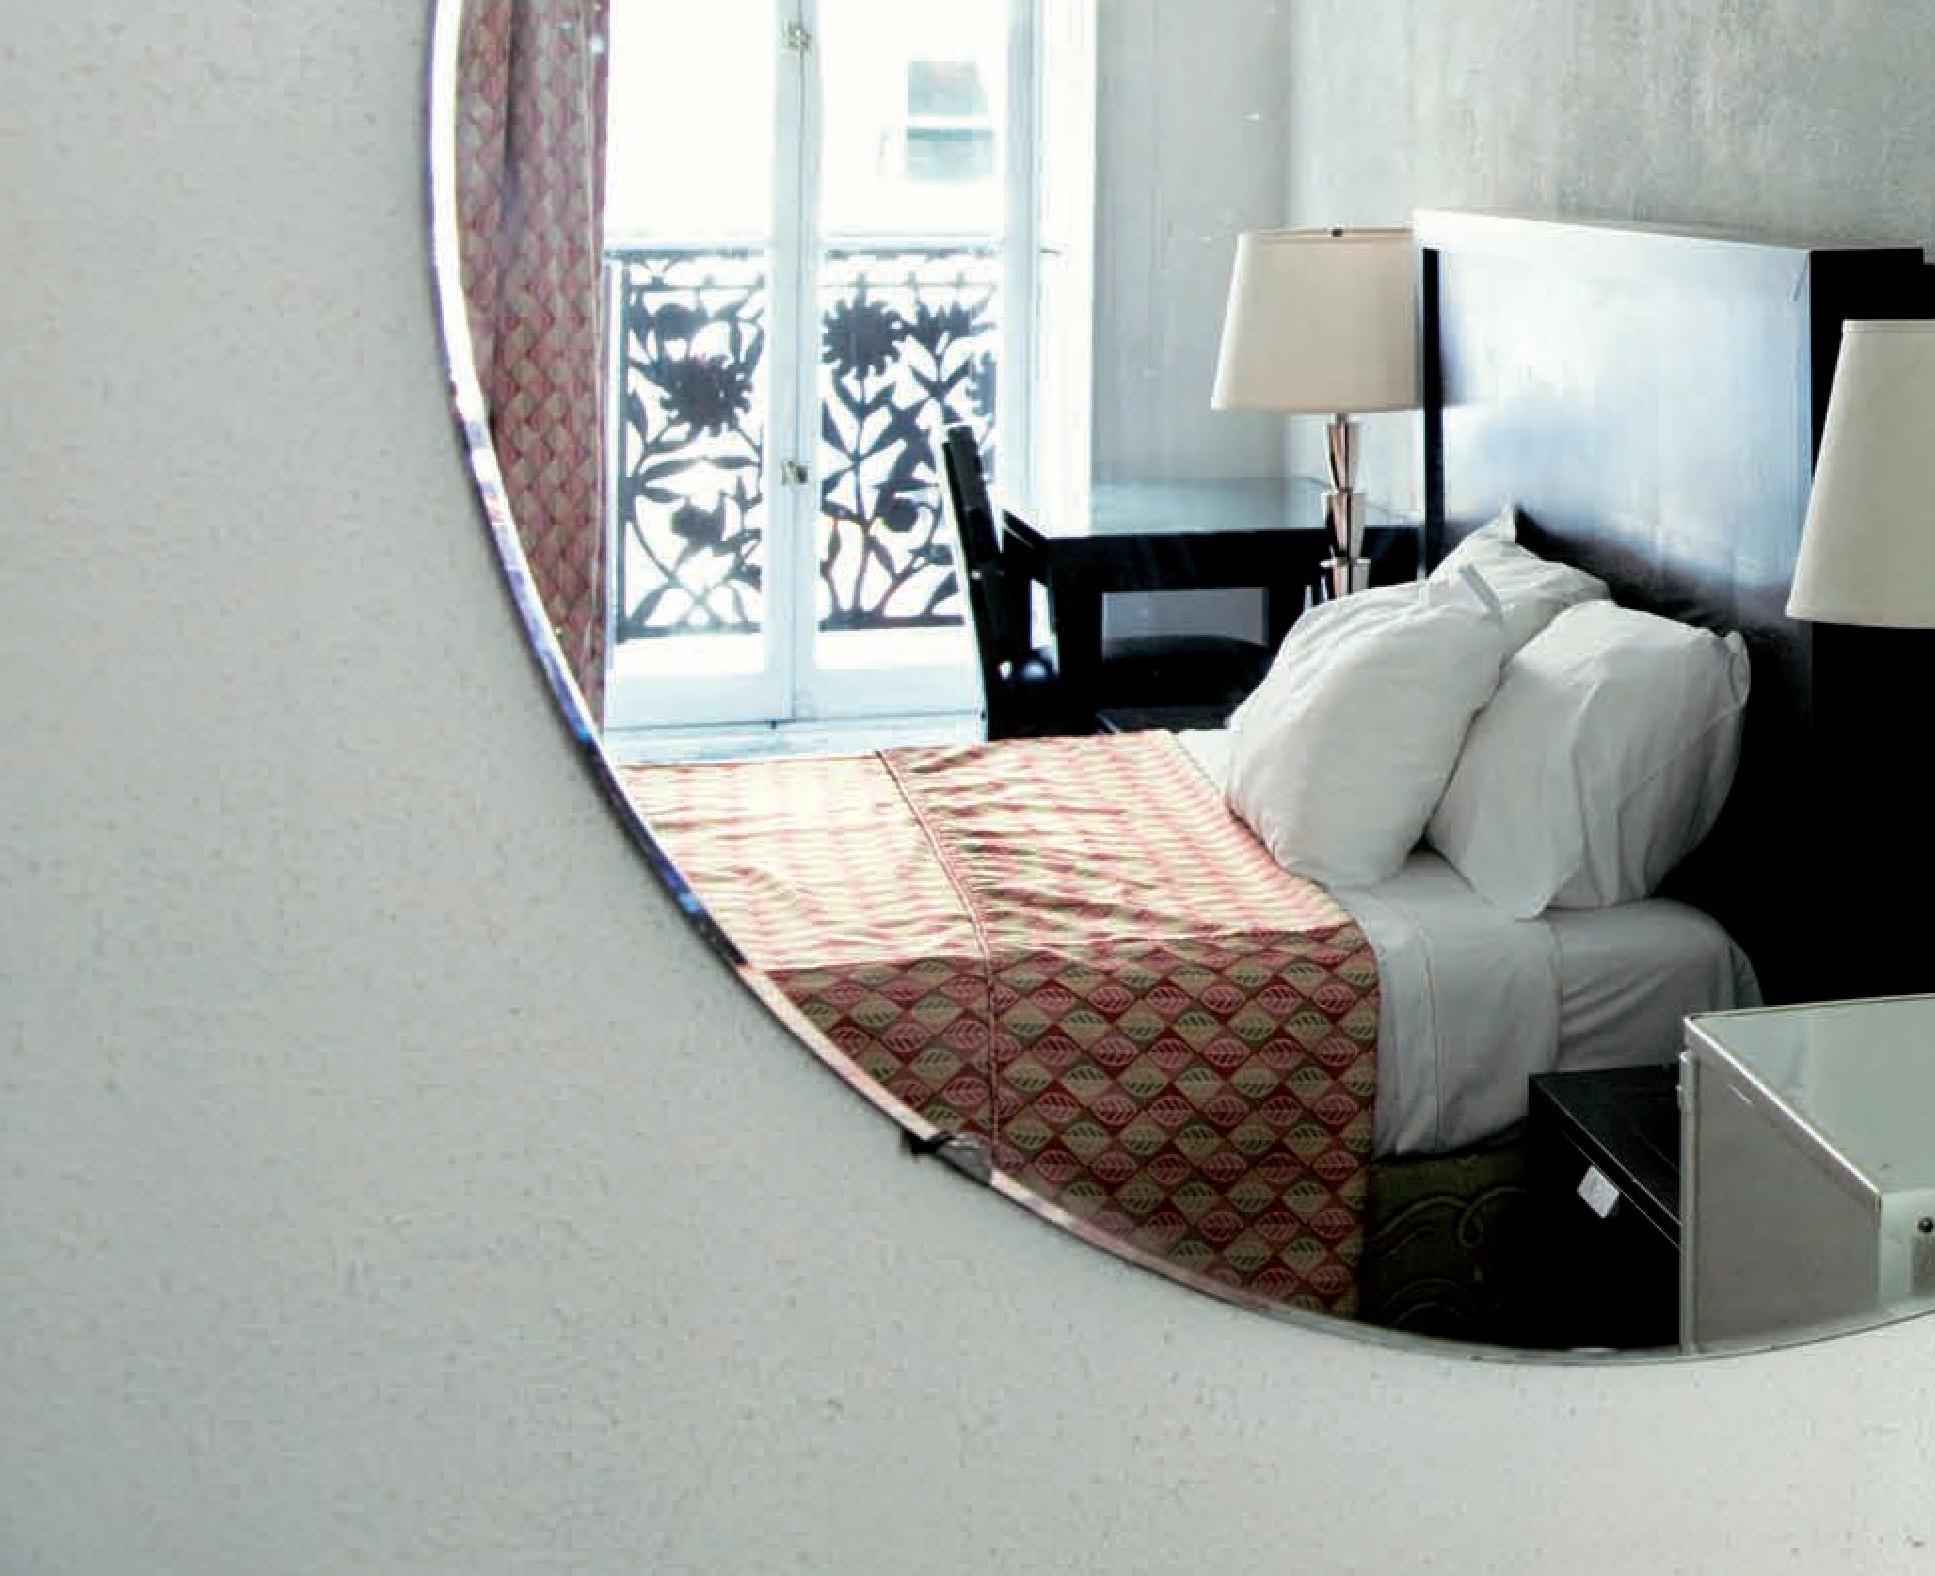 Hotel Chelsea, New York. Room 123 - Contemporary Photograph by Victoria Cohen